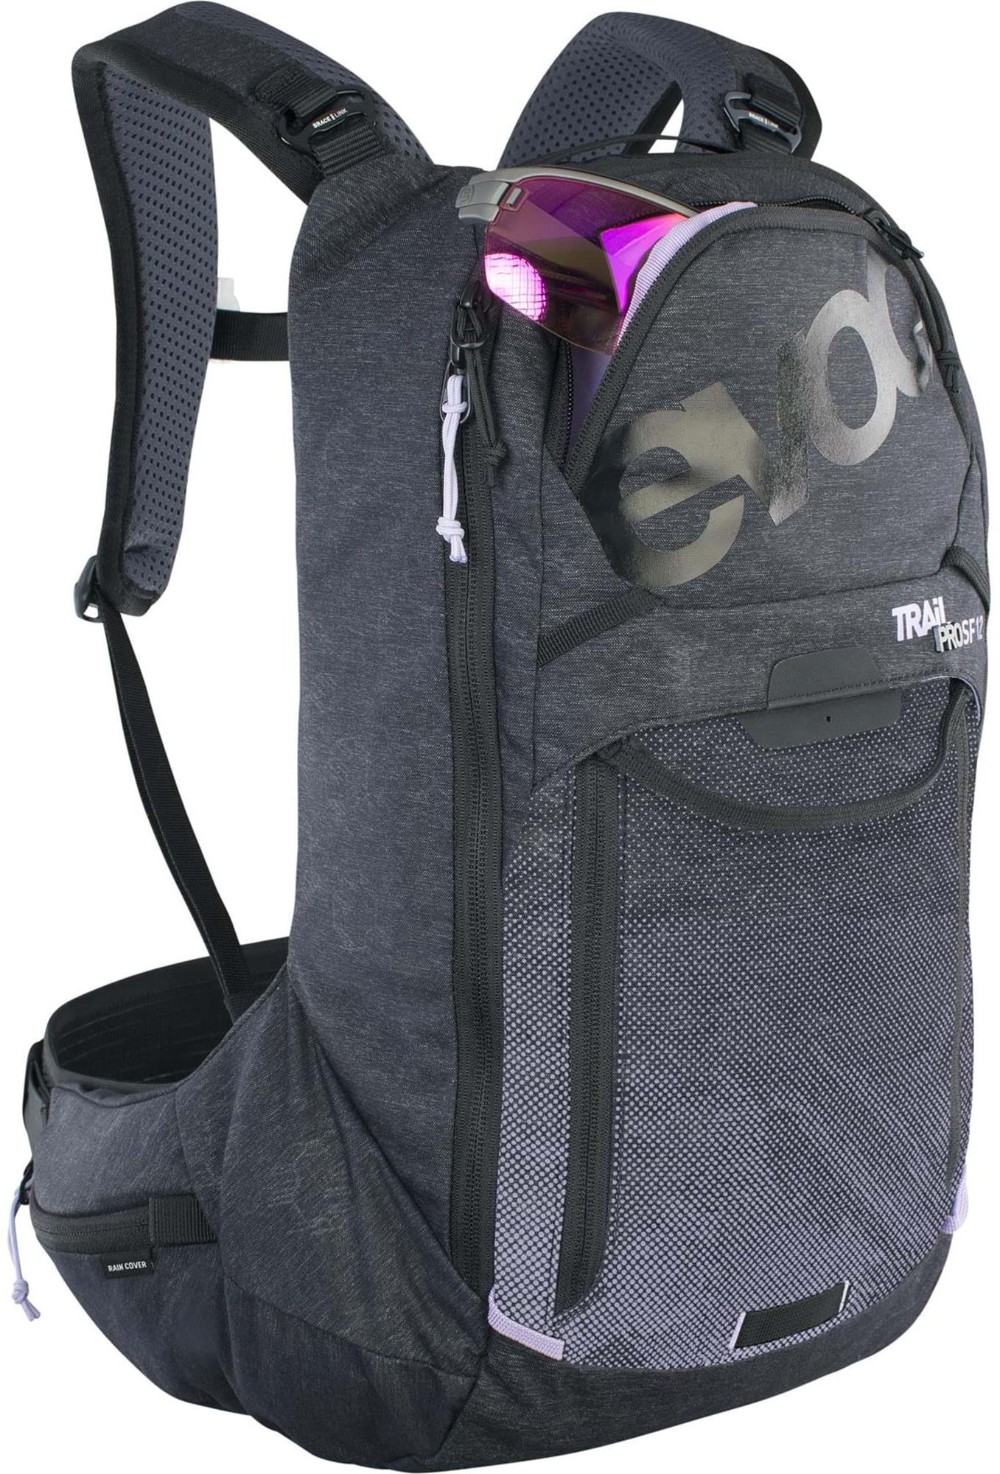 Trail Pro Protector Backpack SF 12L image 2